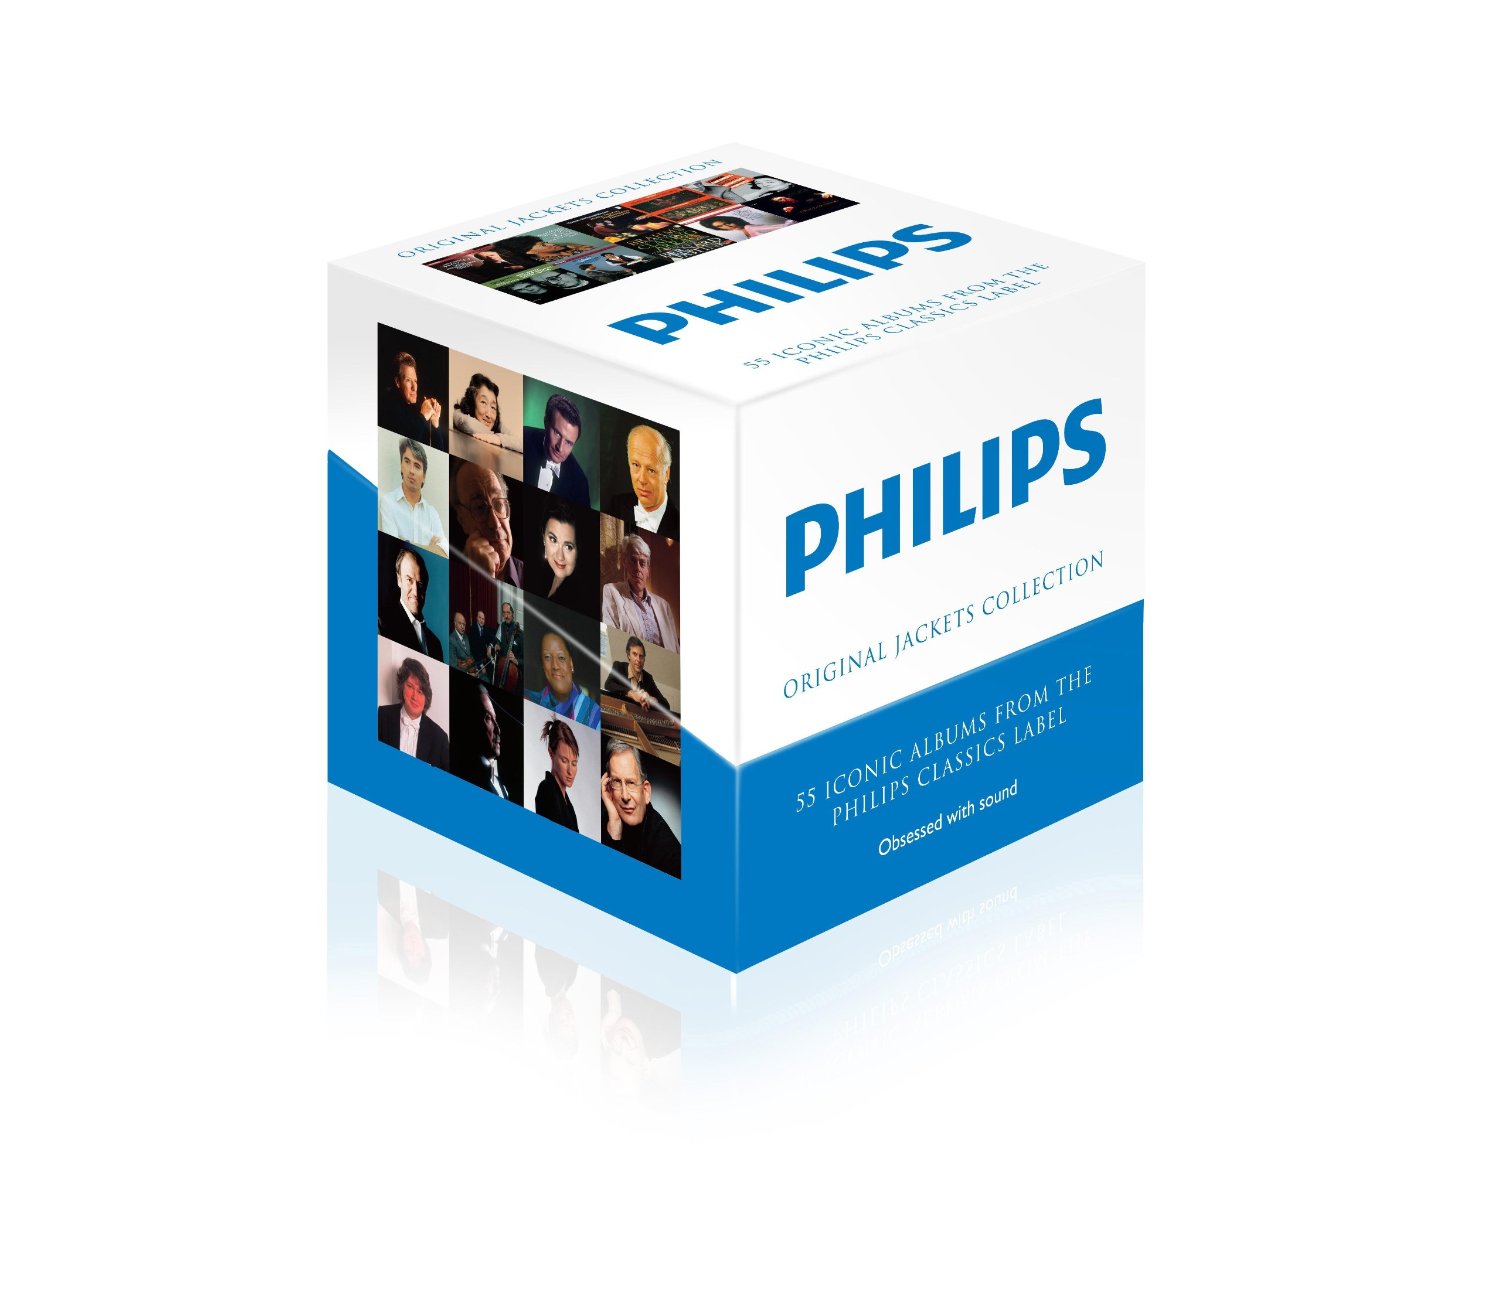 Philips Original Jackets Collection 55 CDs box-set discount for $90.84